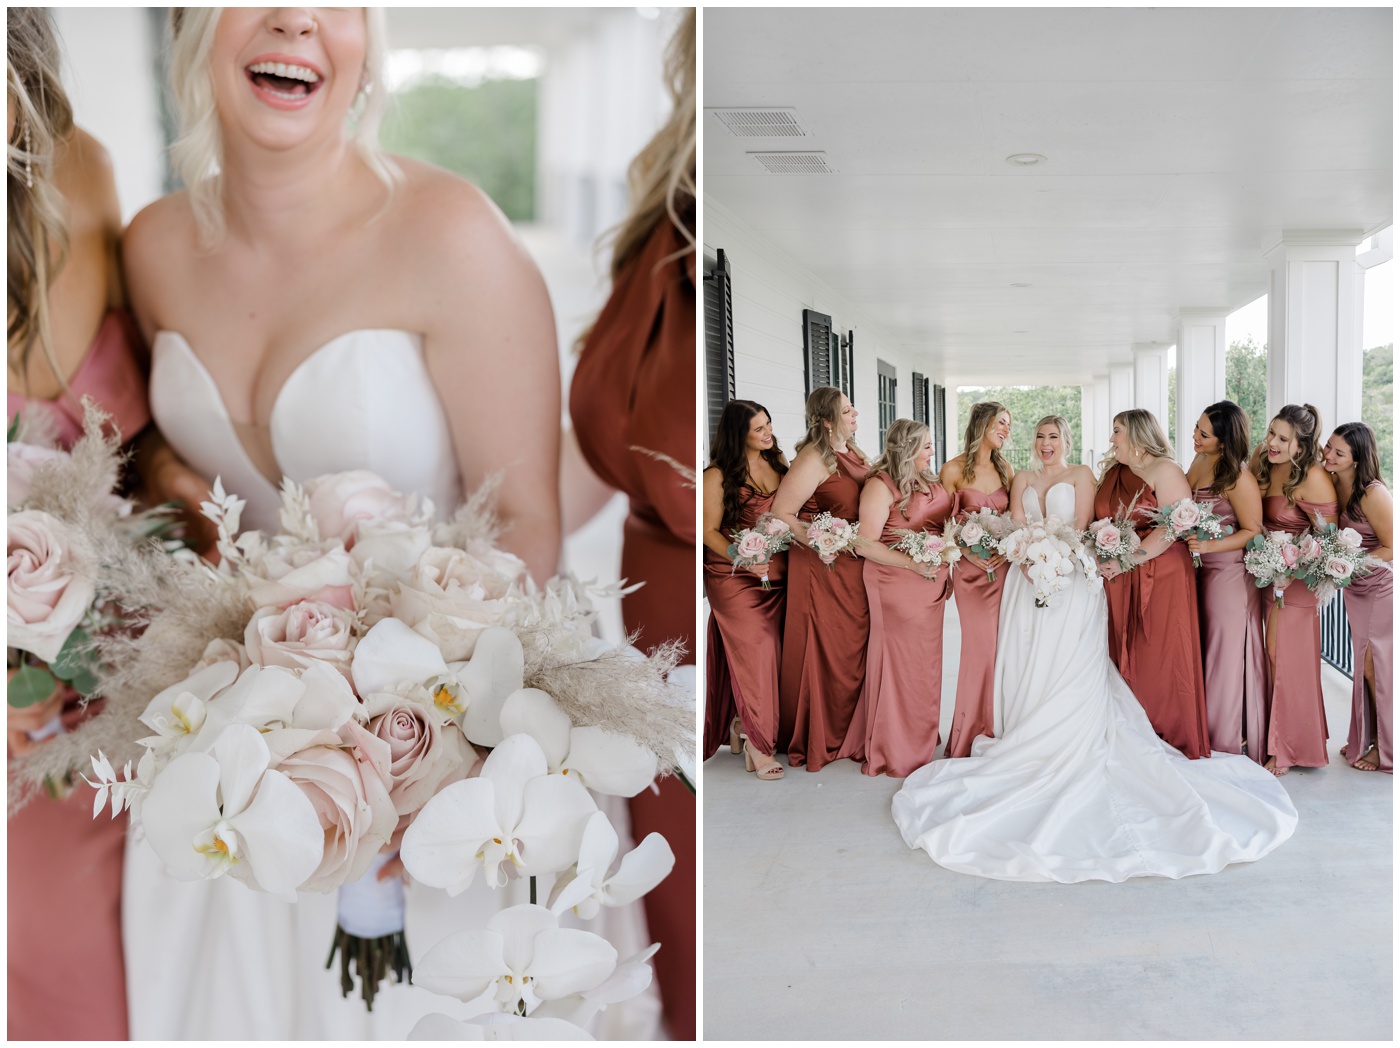 The bridesmaids cheer as they see the bride